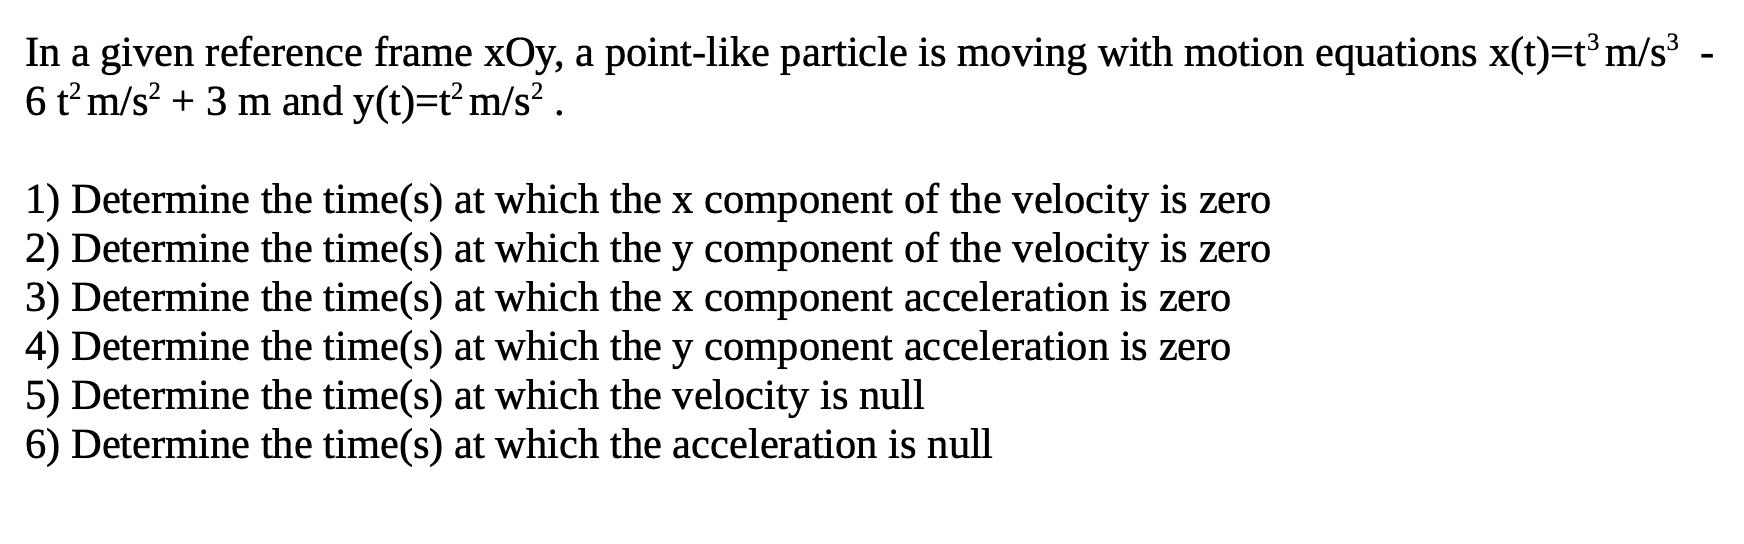 In a given reference frame xOy, a point-like particle is moving with motion equations x(t)=t m/s 6 t m/s + 3